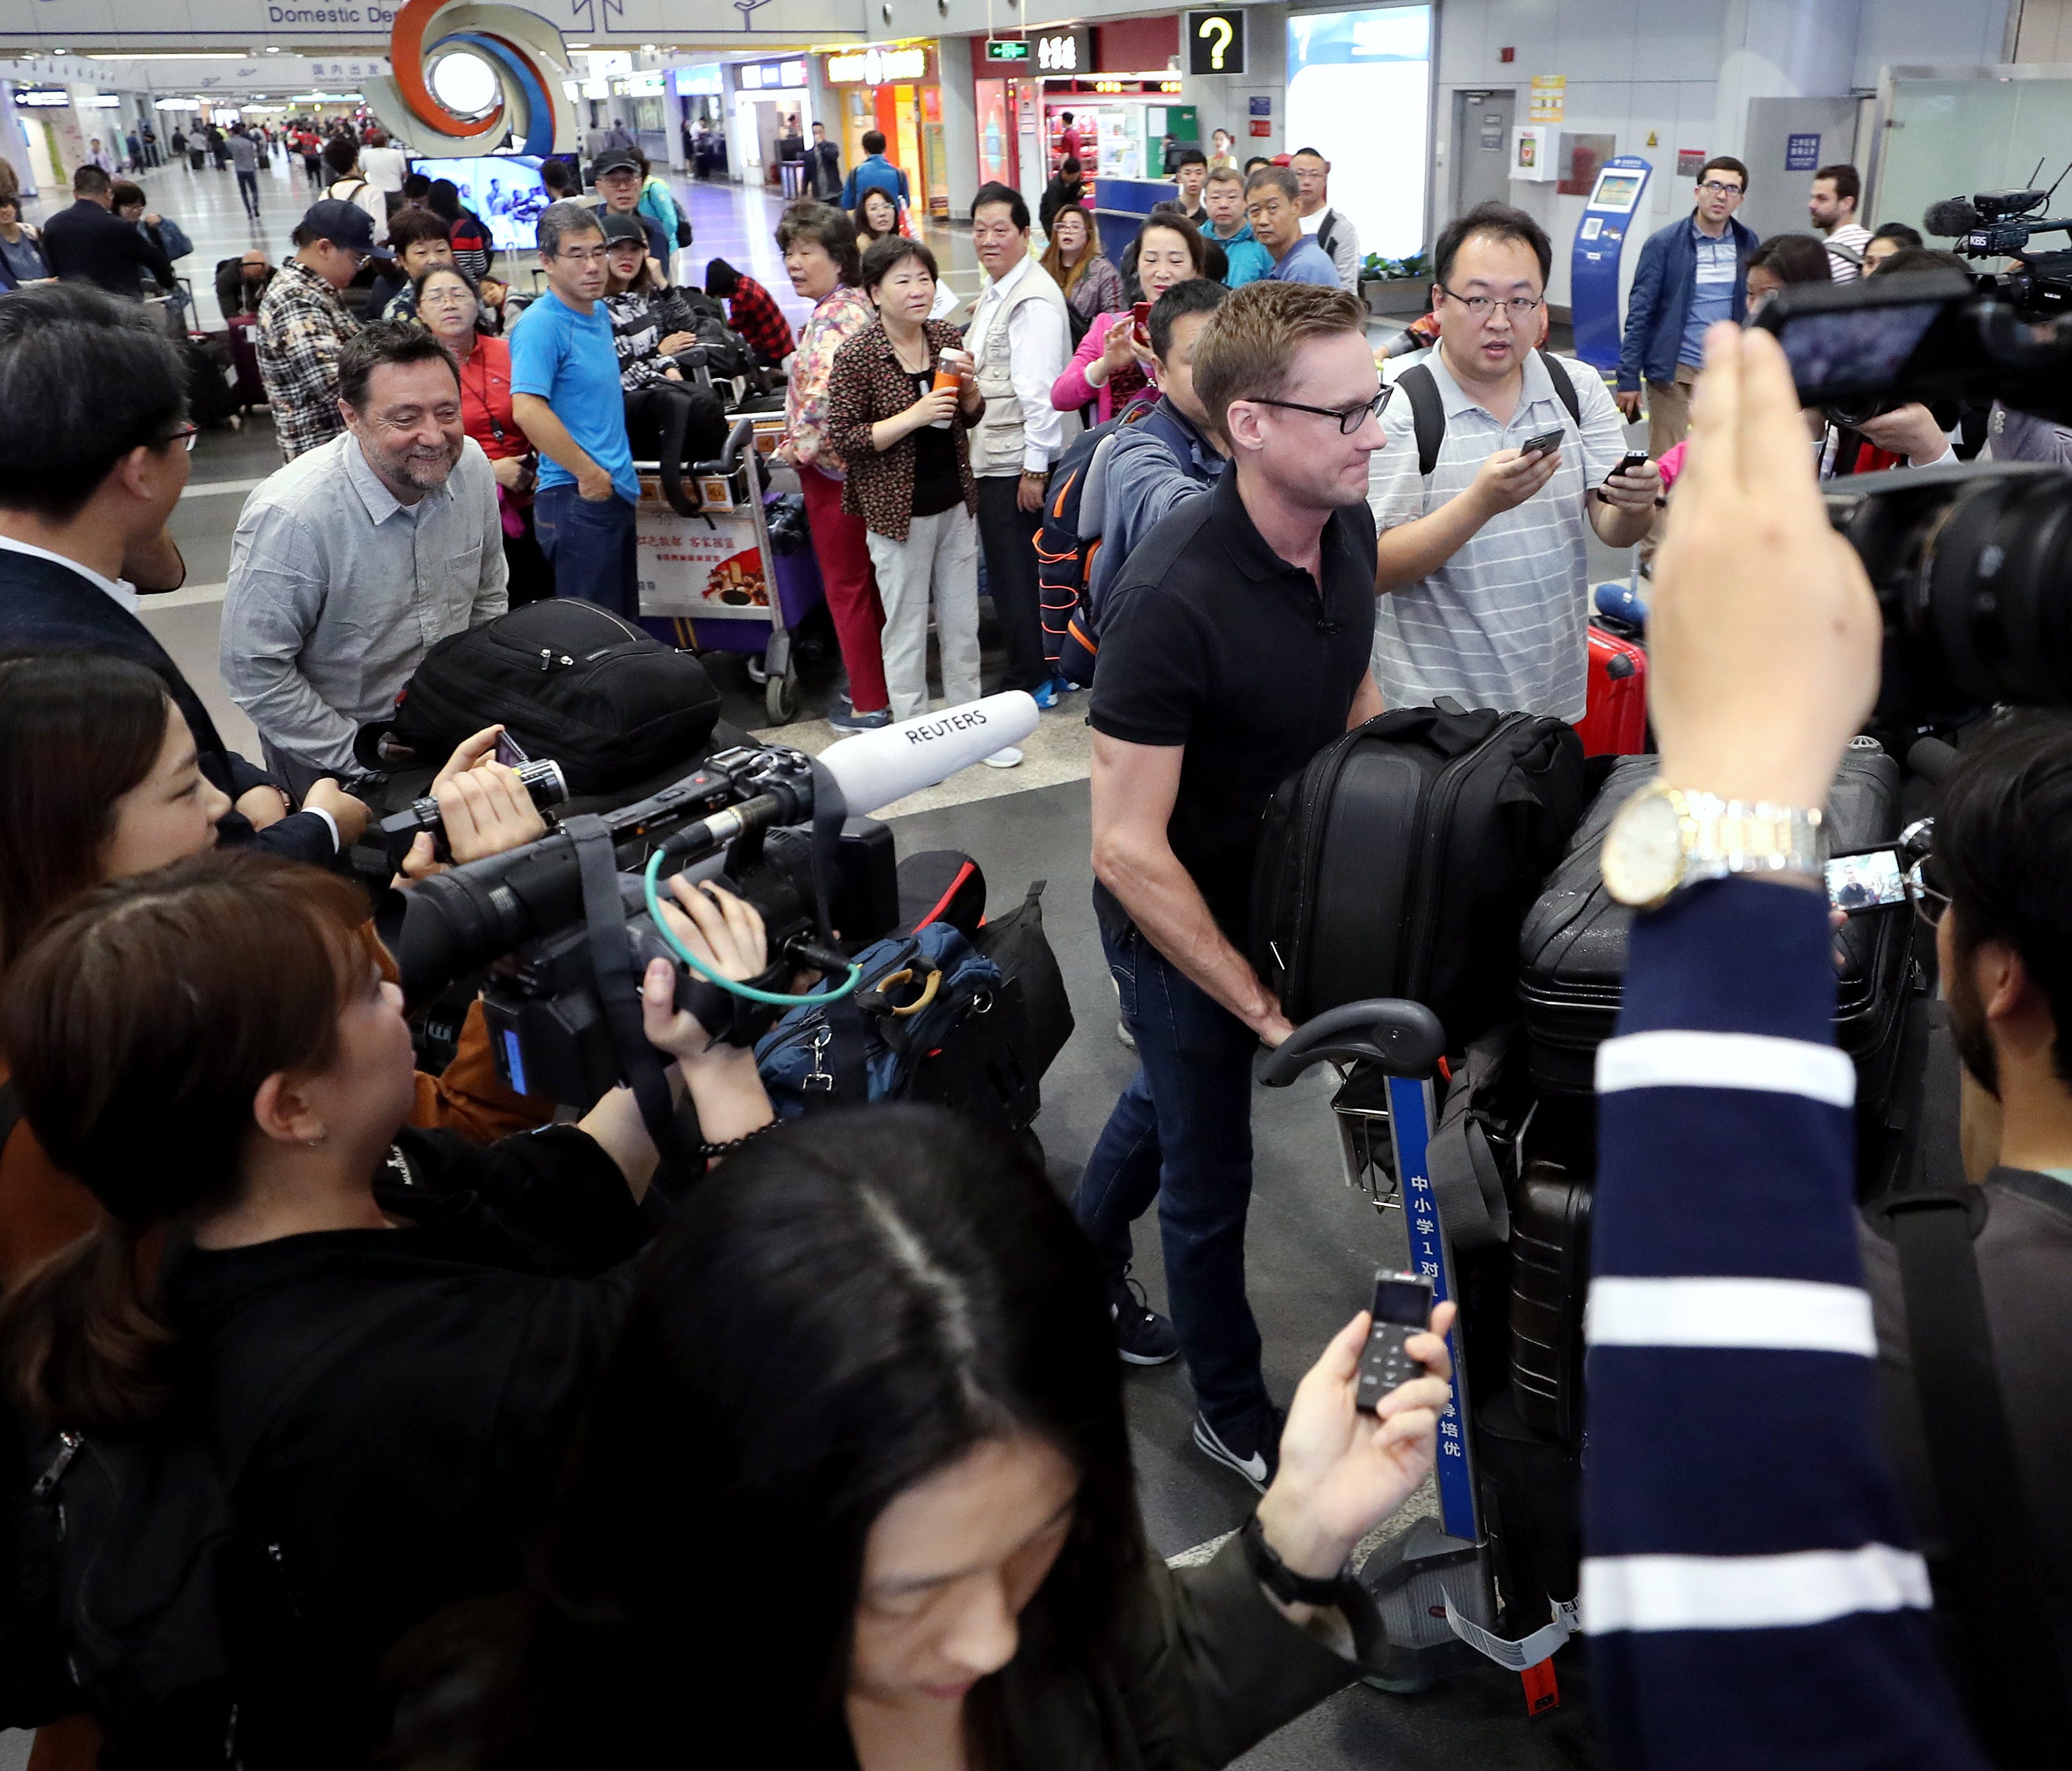 Foreign correspondents invited by North Korea to cover its nuclear site dismantling event depart from a Beijing airport, China, on May 22, 2018.